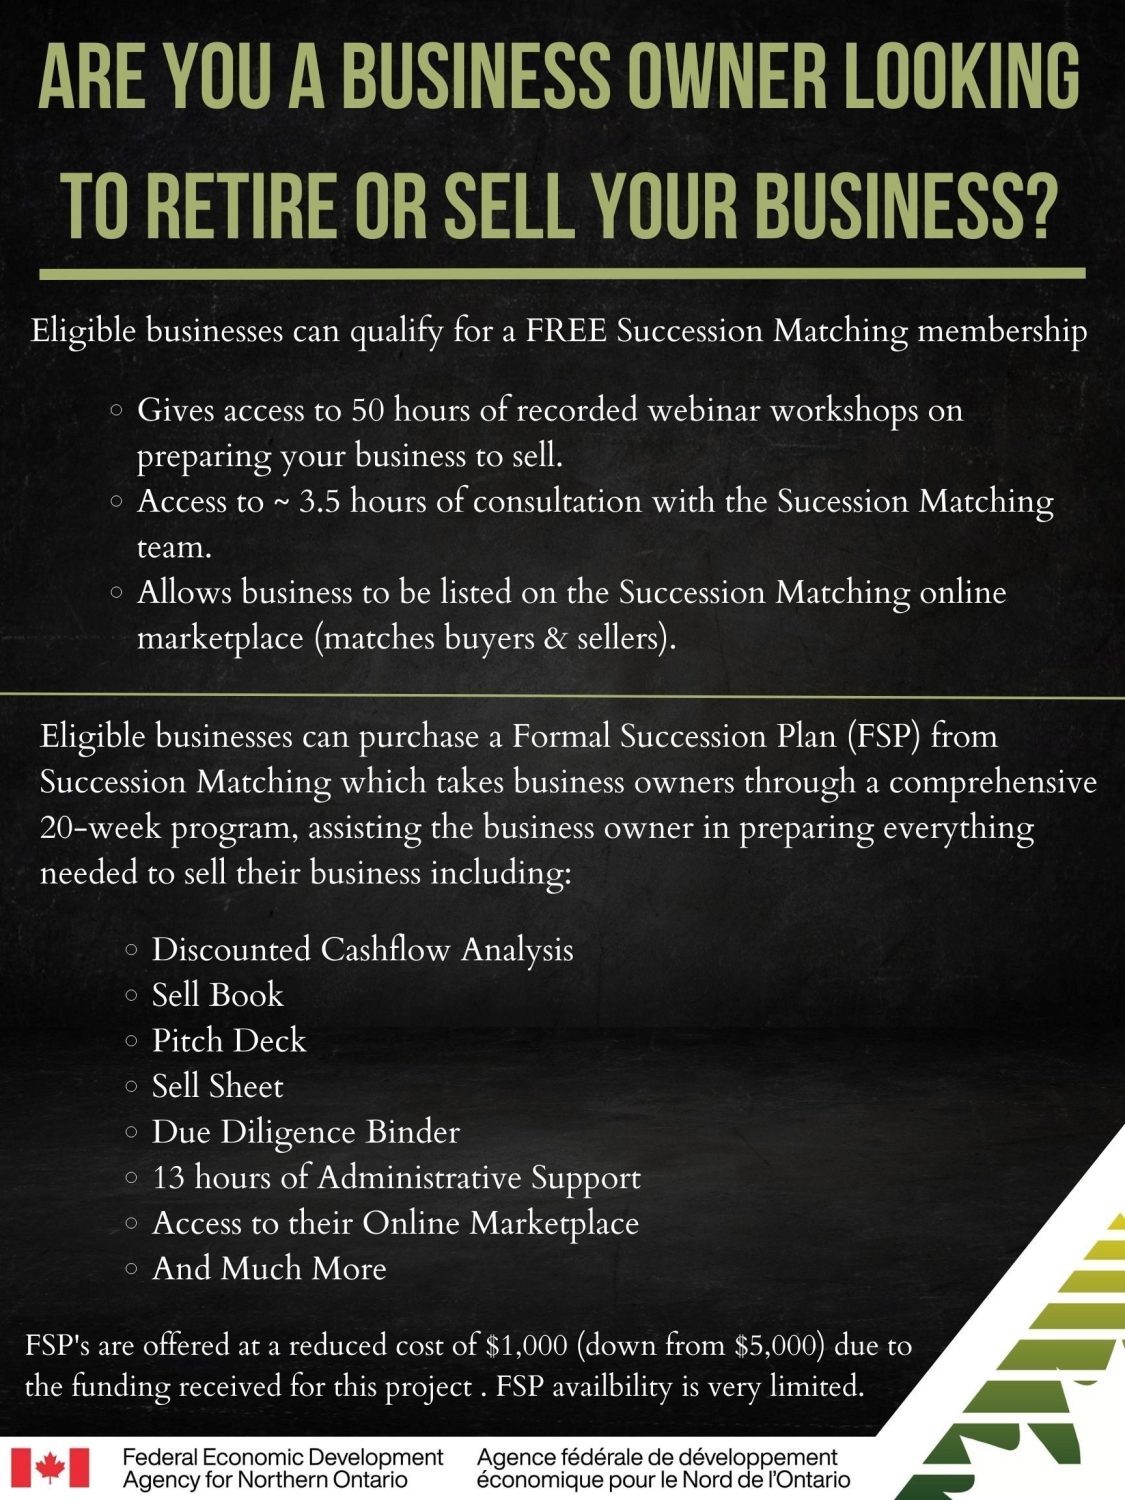 Are you a business owner looking to retire or sell your business (2)